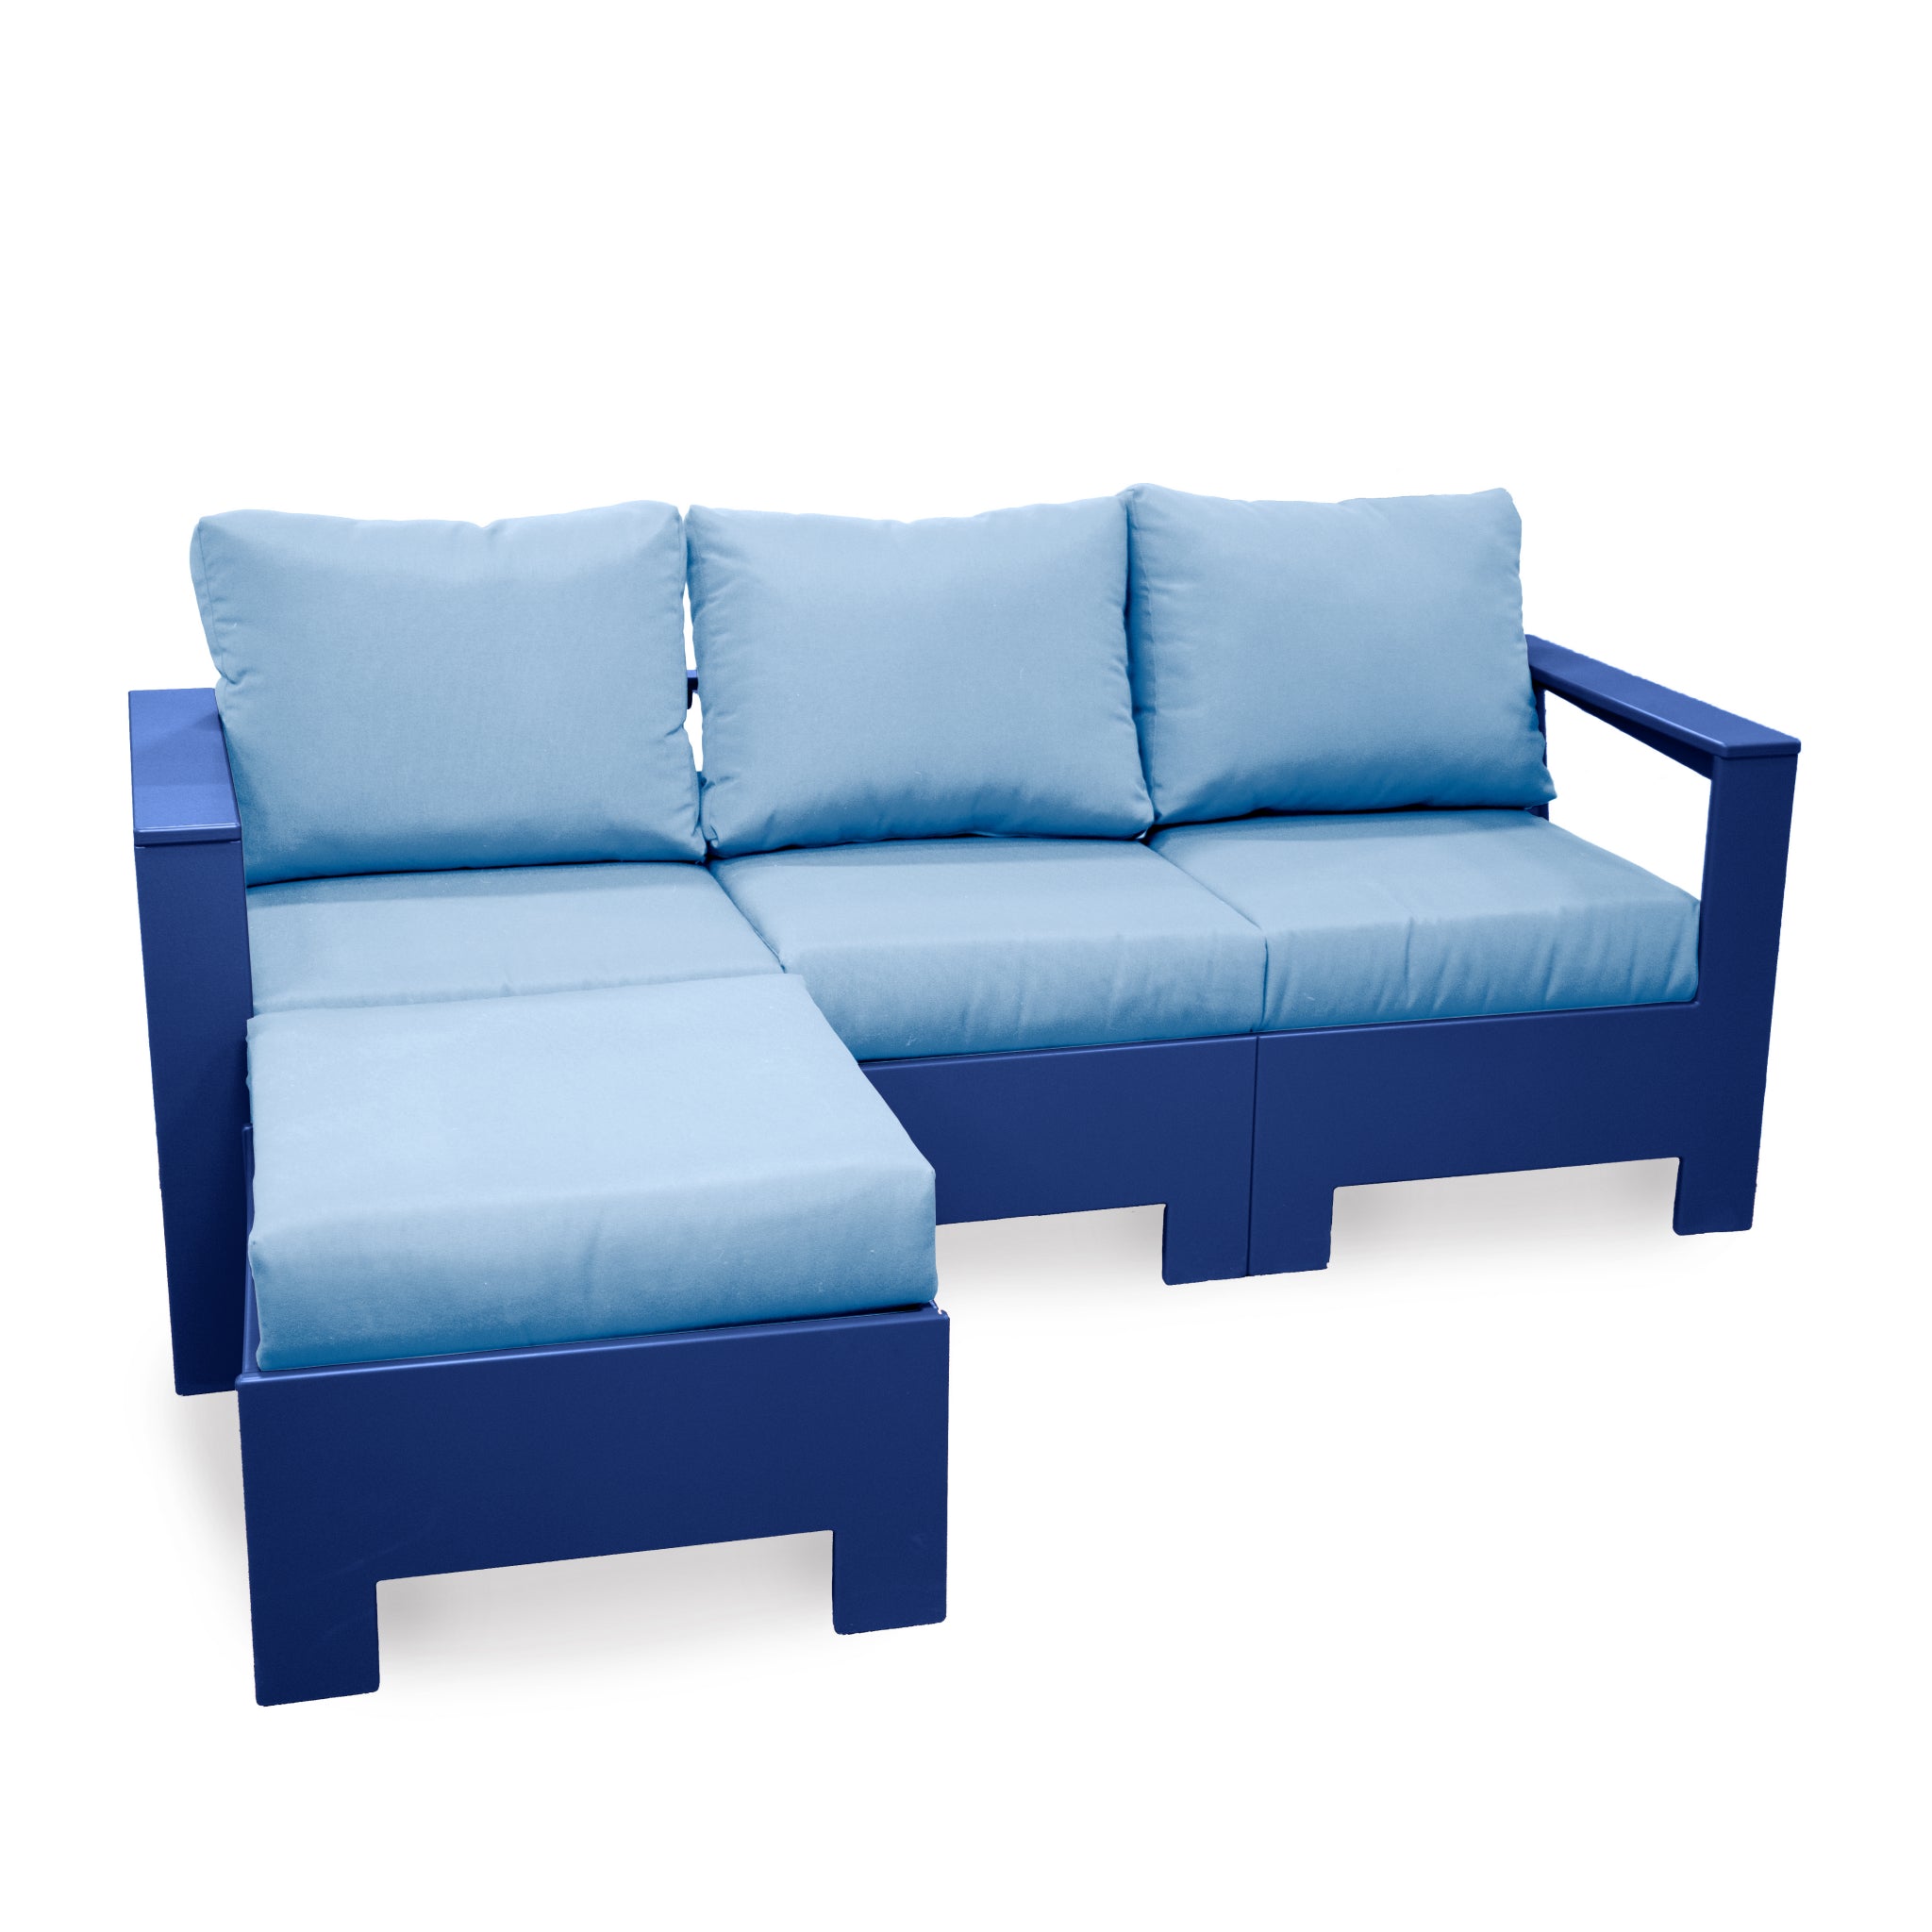 Deep-Seated Sectional Set 3